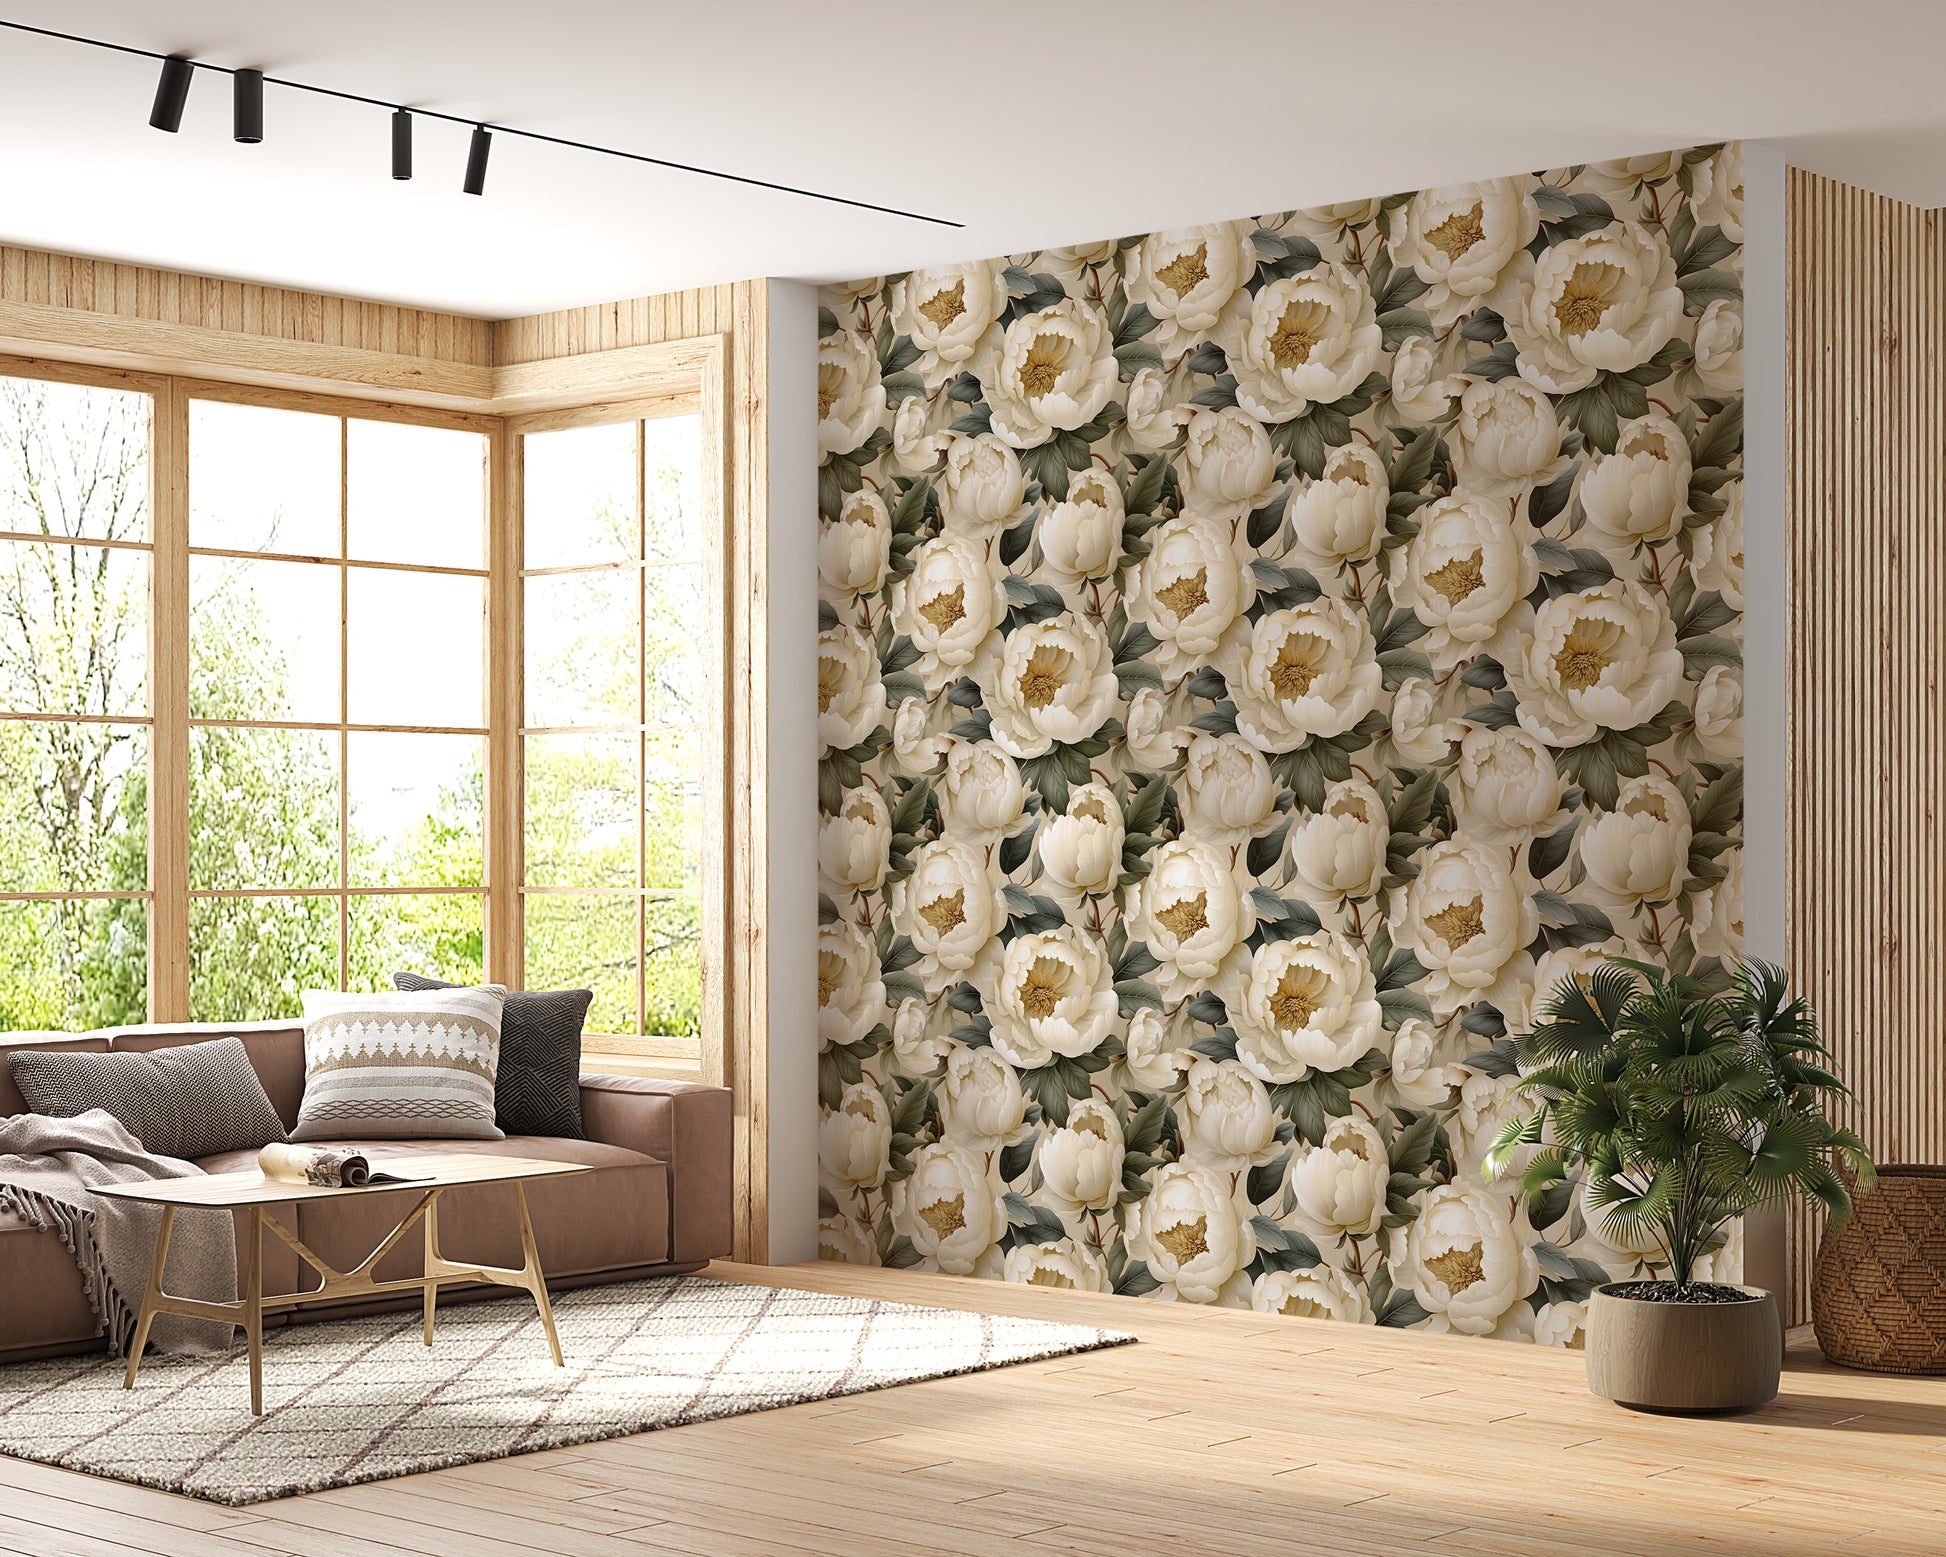 Stylish Removable Floral Wall Art